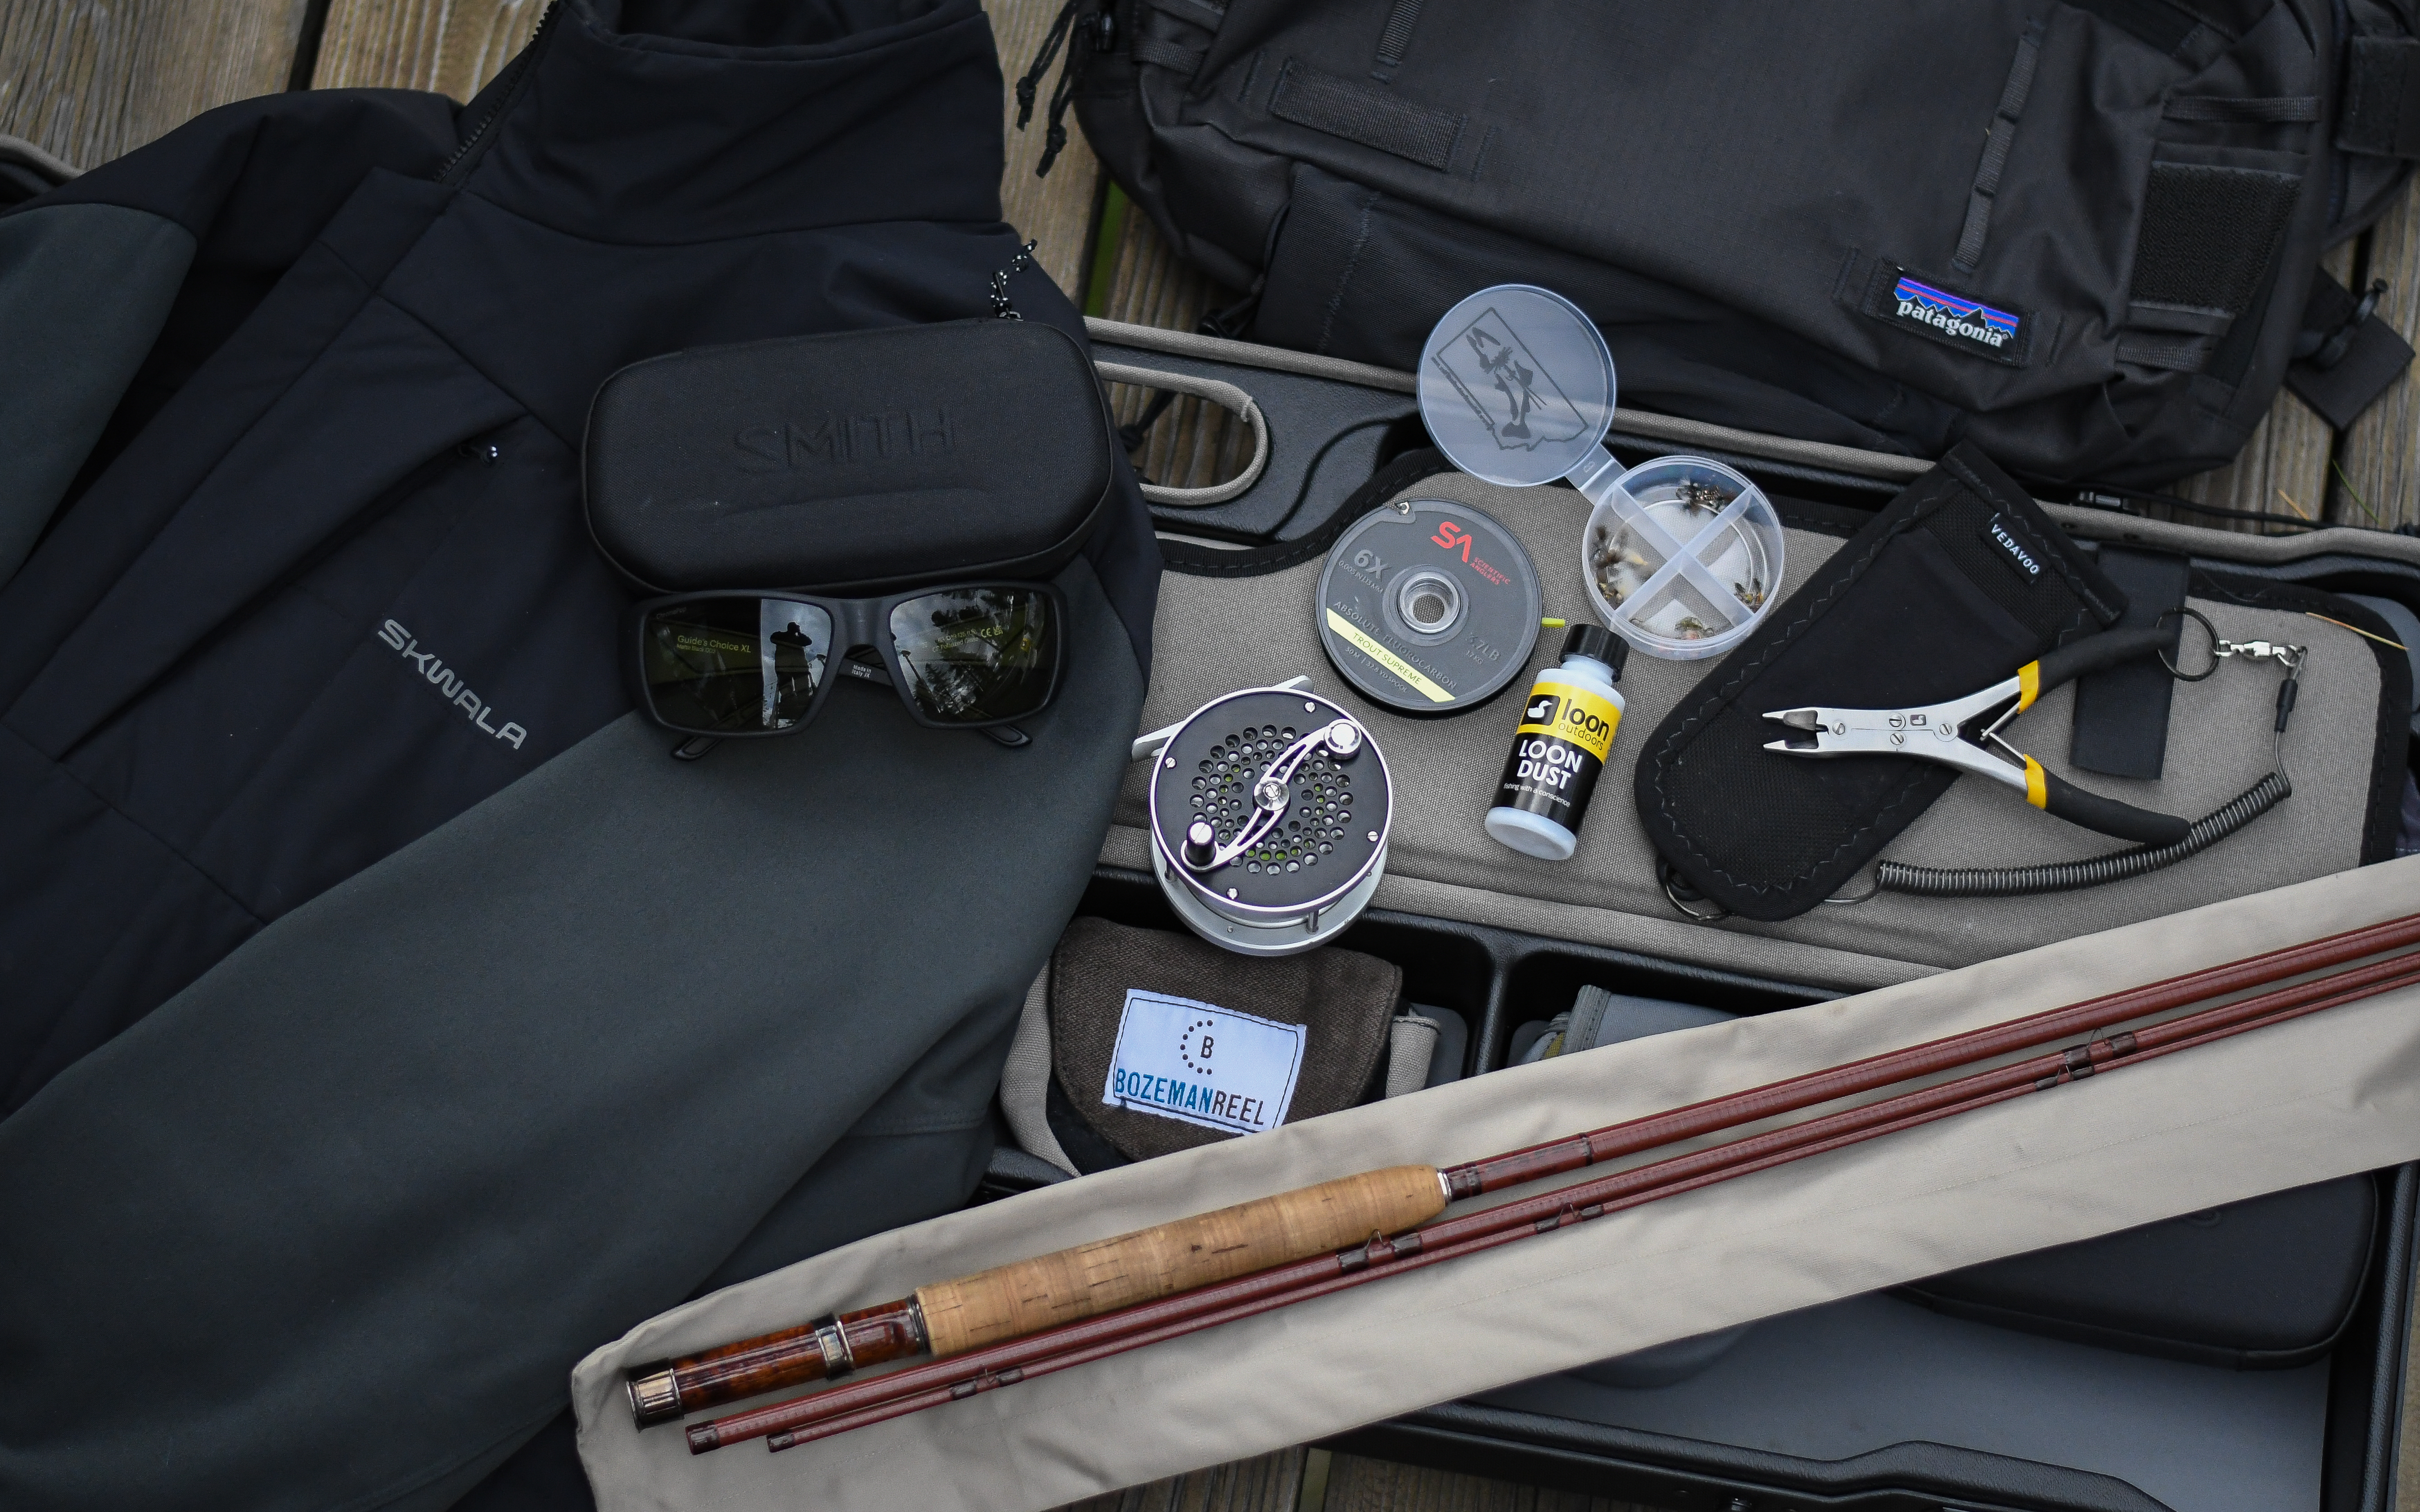 The Fiberglass Manifesto: GEAR REVIEW - Tools for Nelson's Spring